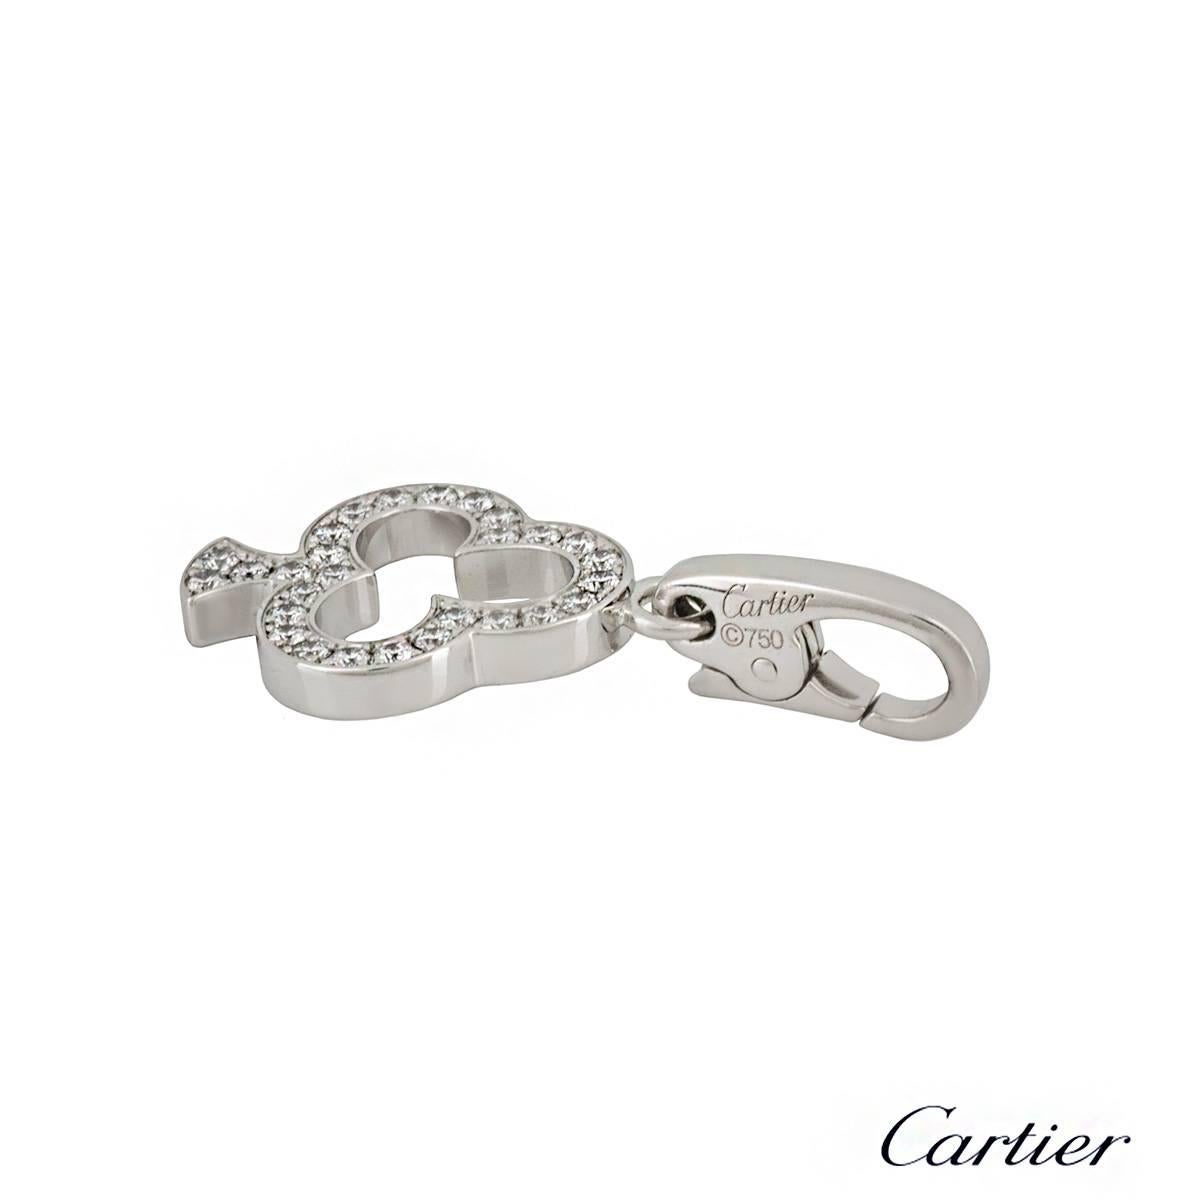 An 18k white gold charm pendant by Cartier. The club motif is set with 28 round brilliant cut diamonds totalling approximately 0.20ct. The 1.5cm charm features a lobster clasp at the top and has a gross weight of 2.82 grams. The charm comes complete